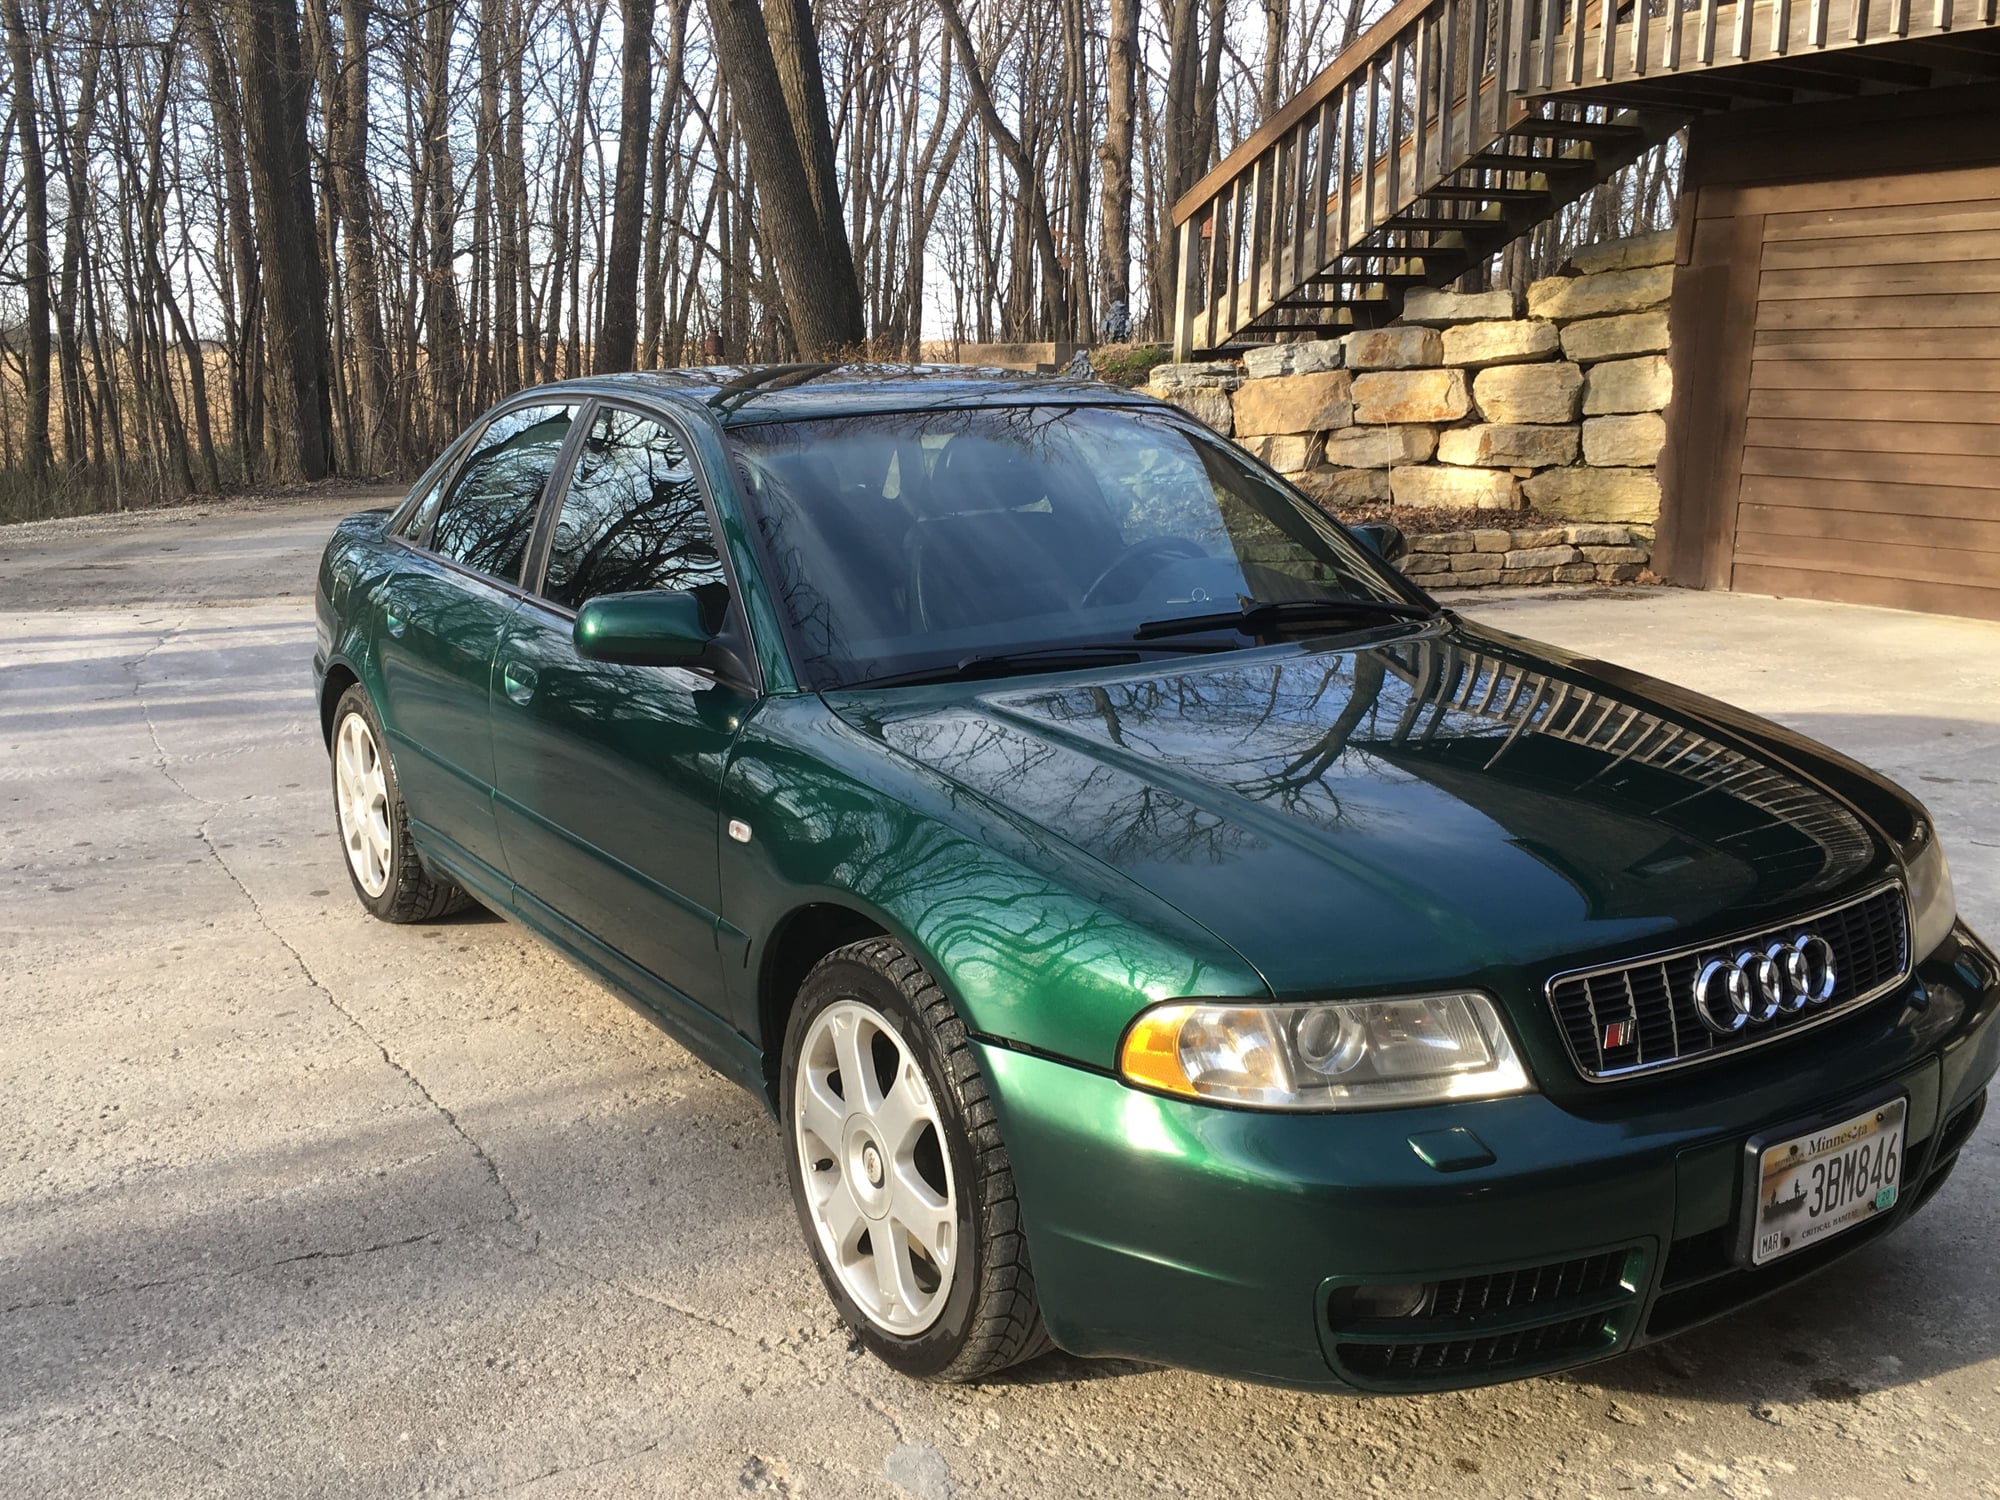 Audi Other FS in San Francisco: 2001.5 Audi B5 S4 in Cactus Green -  AudiWorld Forums